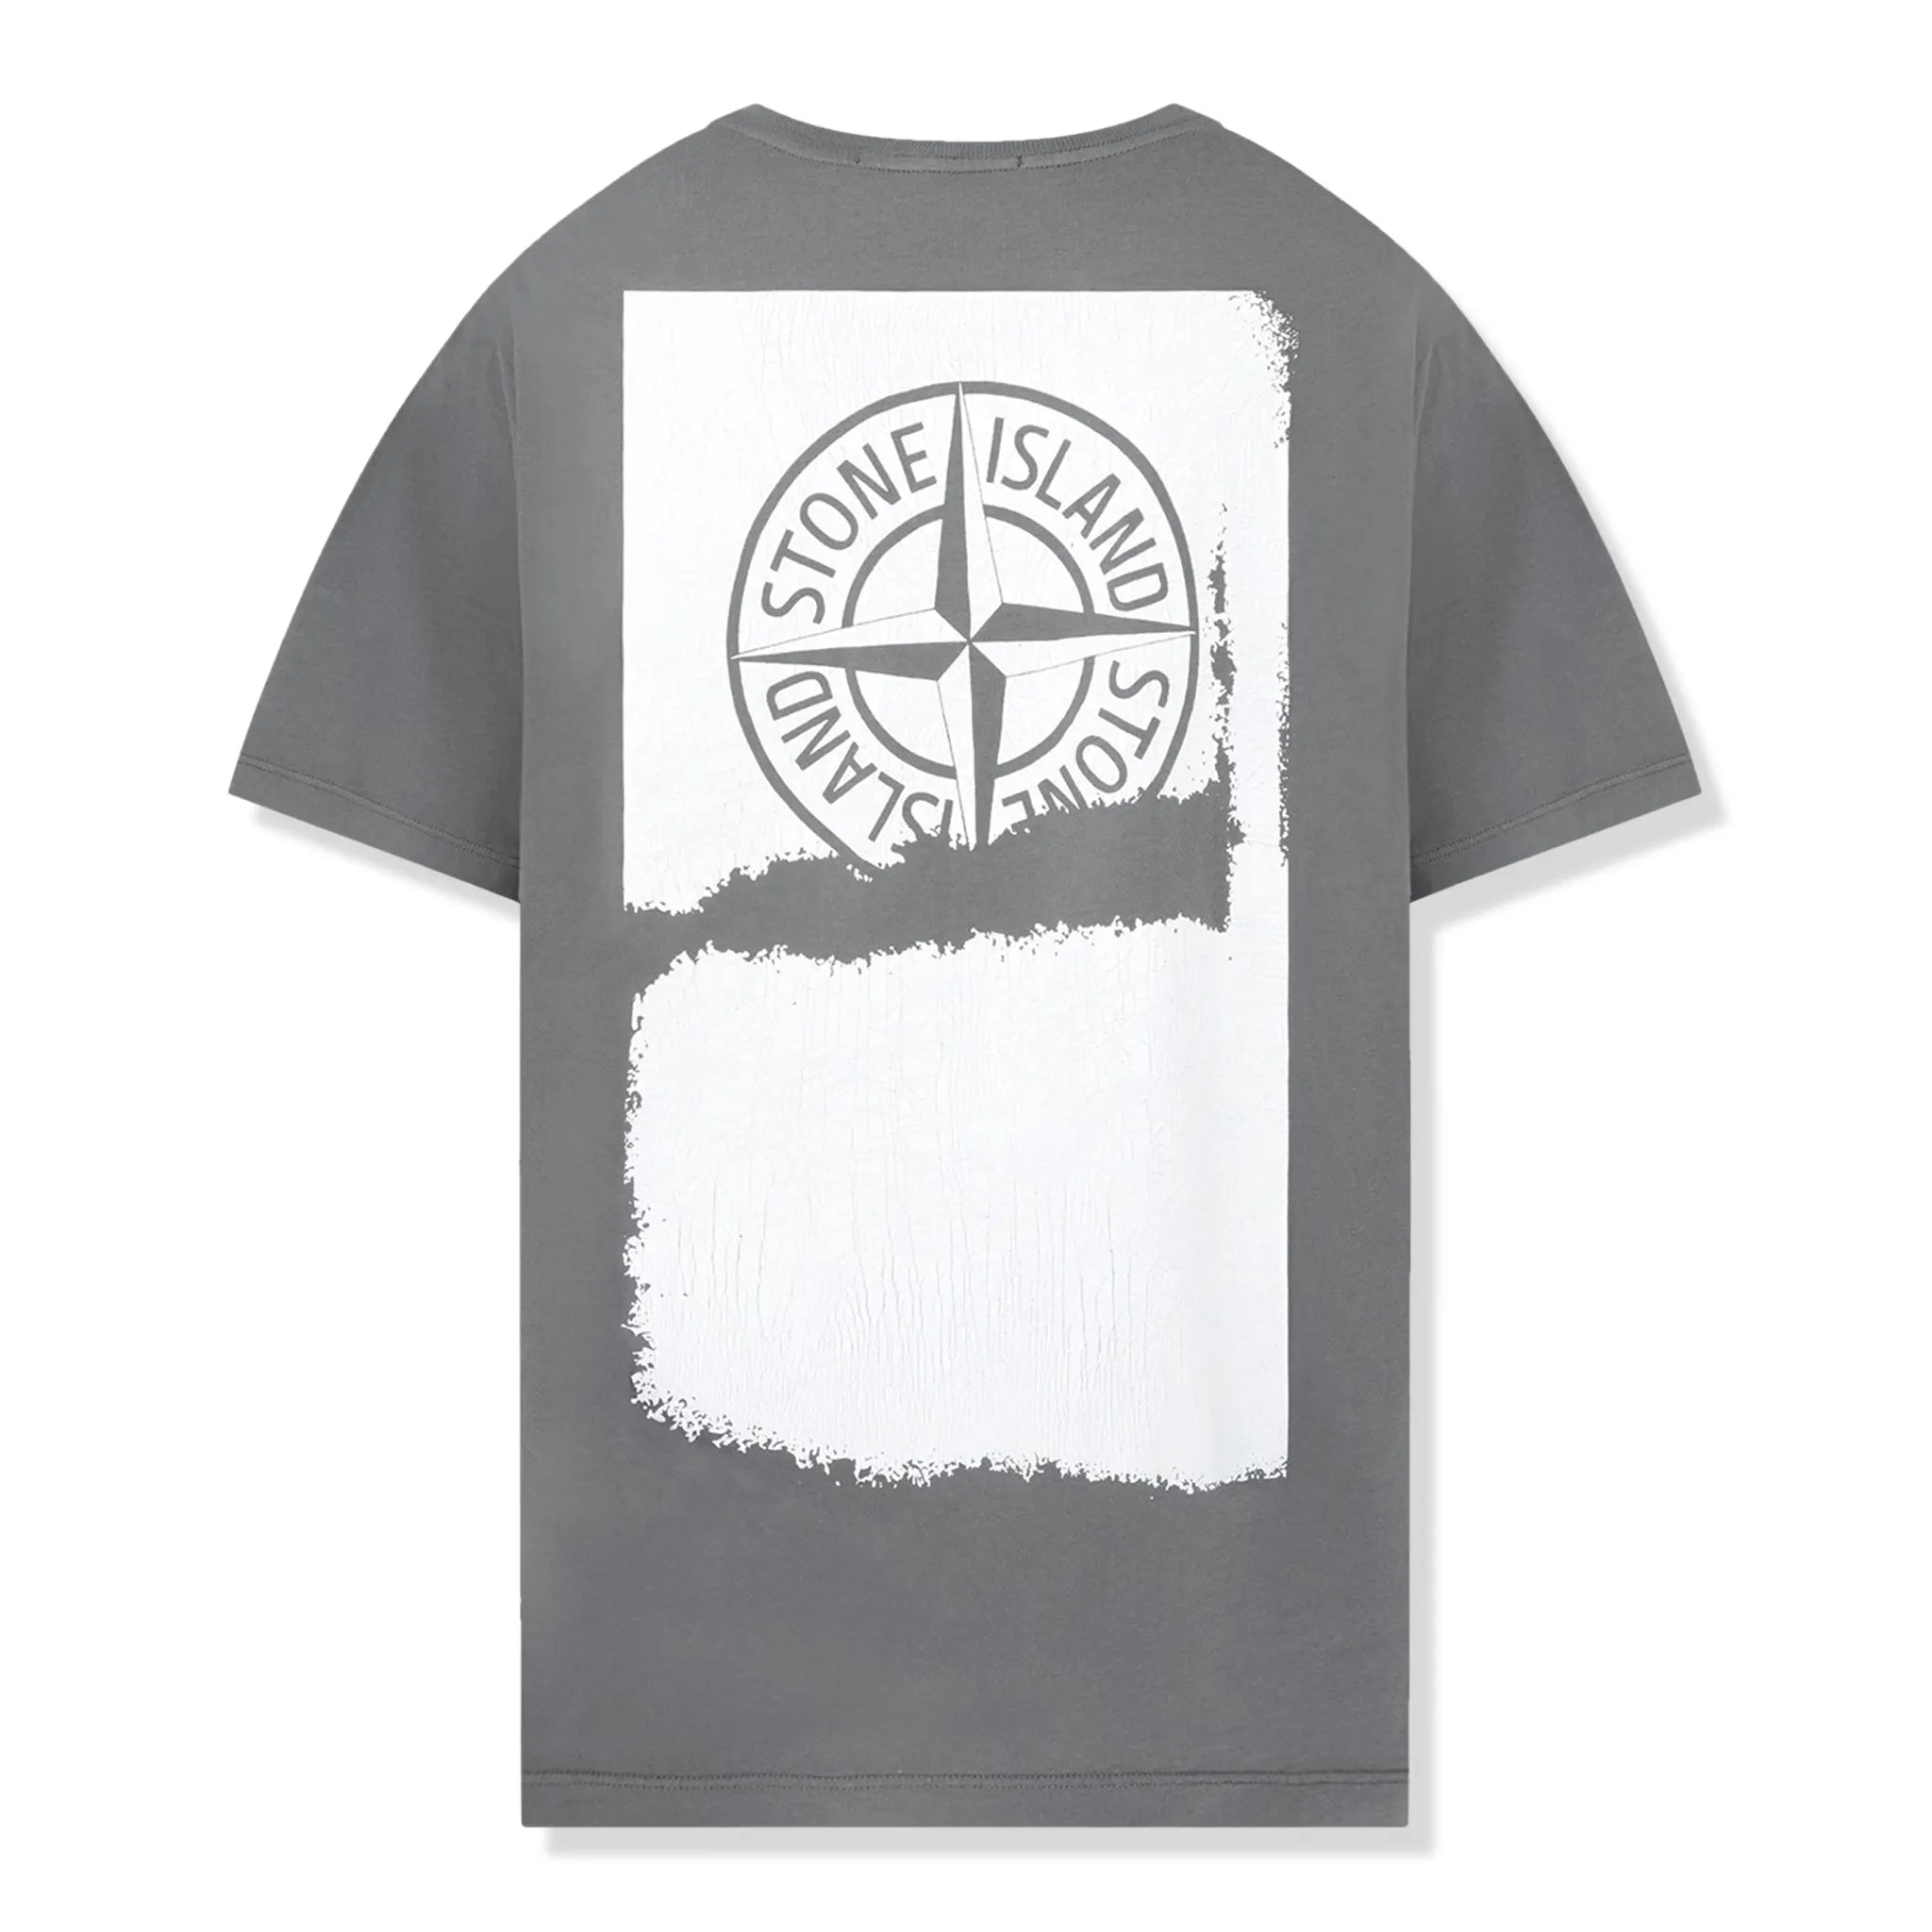 Back view of Stone Island Paint 1 Short Sleeved Grey T Shirt 78152NS89